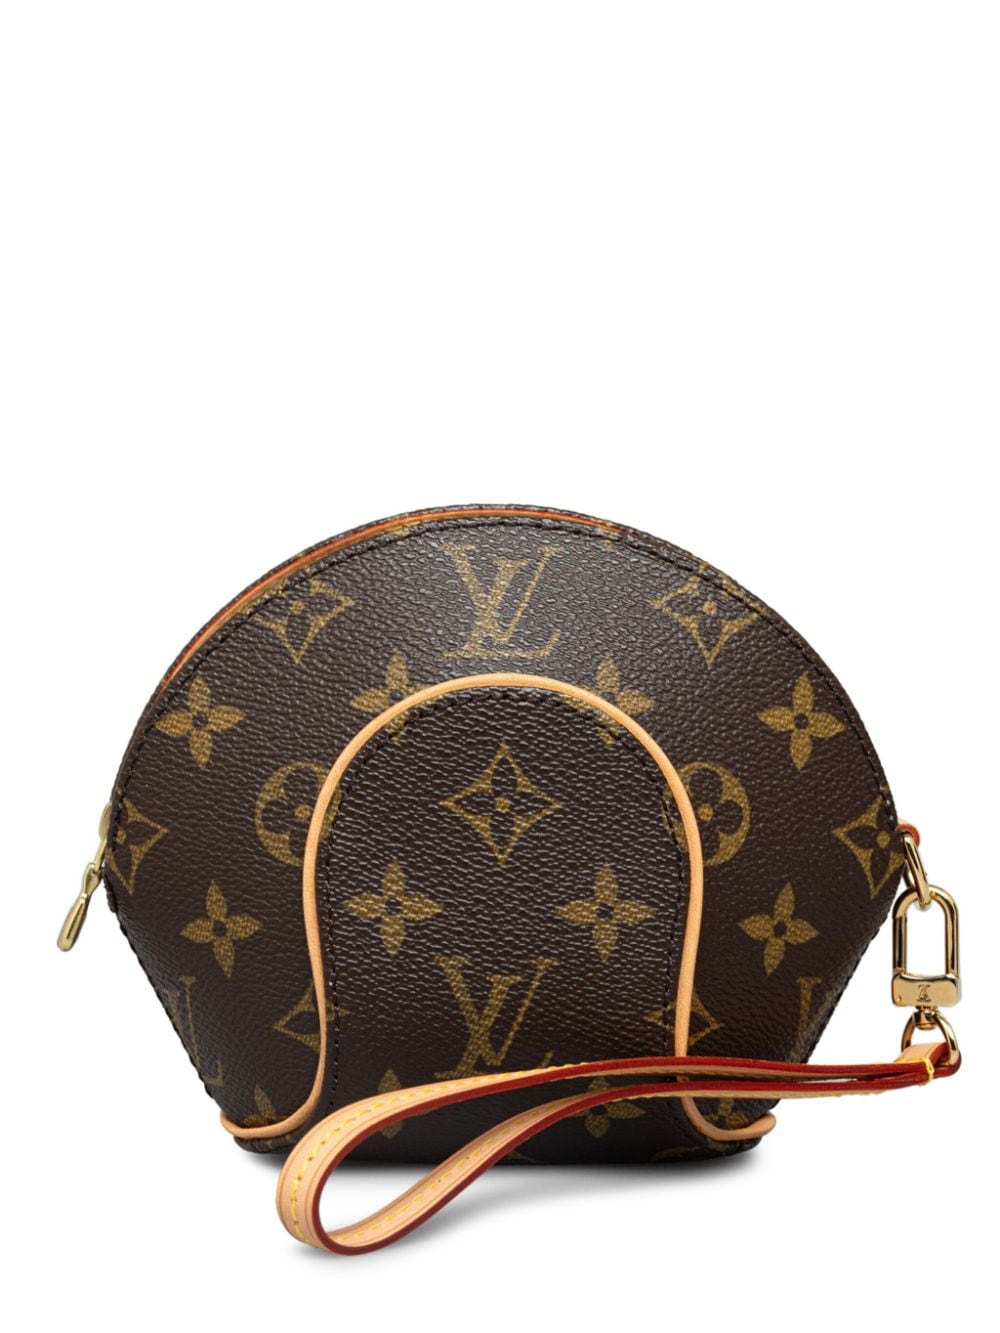 Pre-owned Louis Vuitton 2005 Ellipse Clutch Bag In Brown